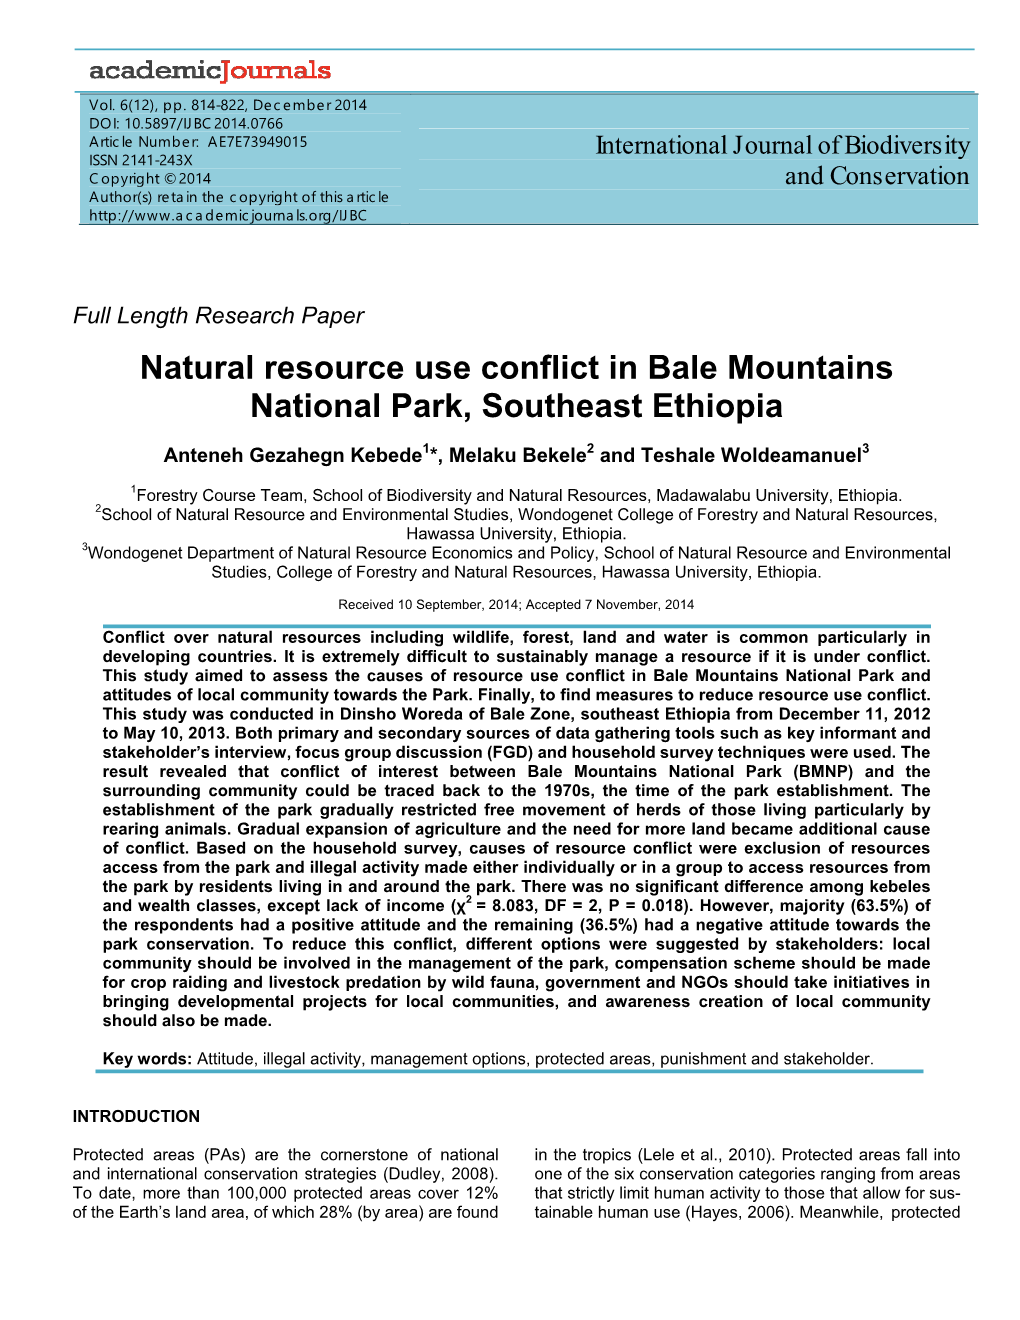 Natural Resource Use Conflict in Bale Mountains National Park, Southeast Ethiopia